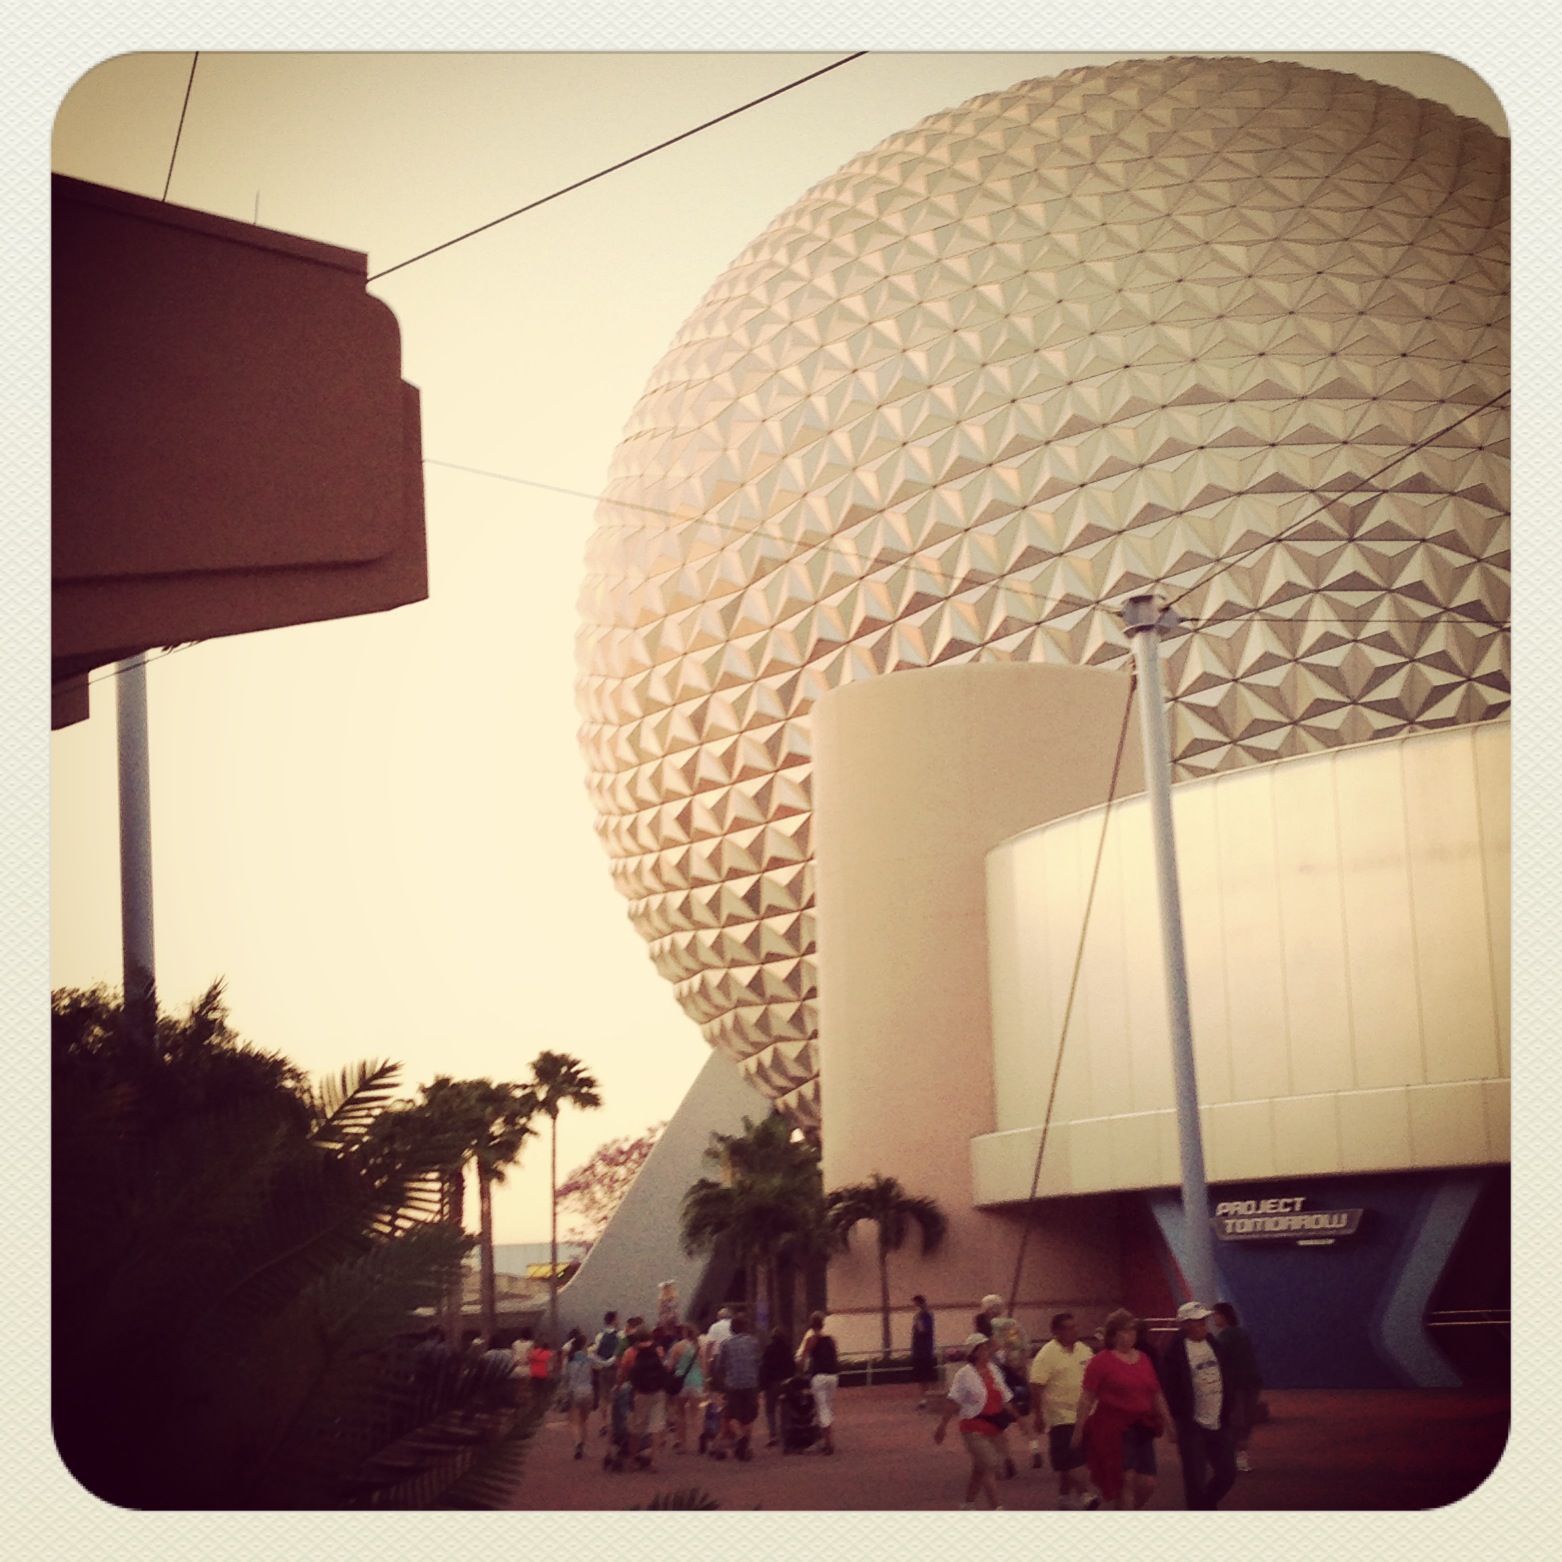 First Visit to Epcot